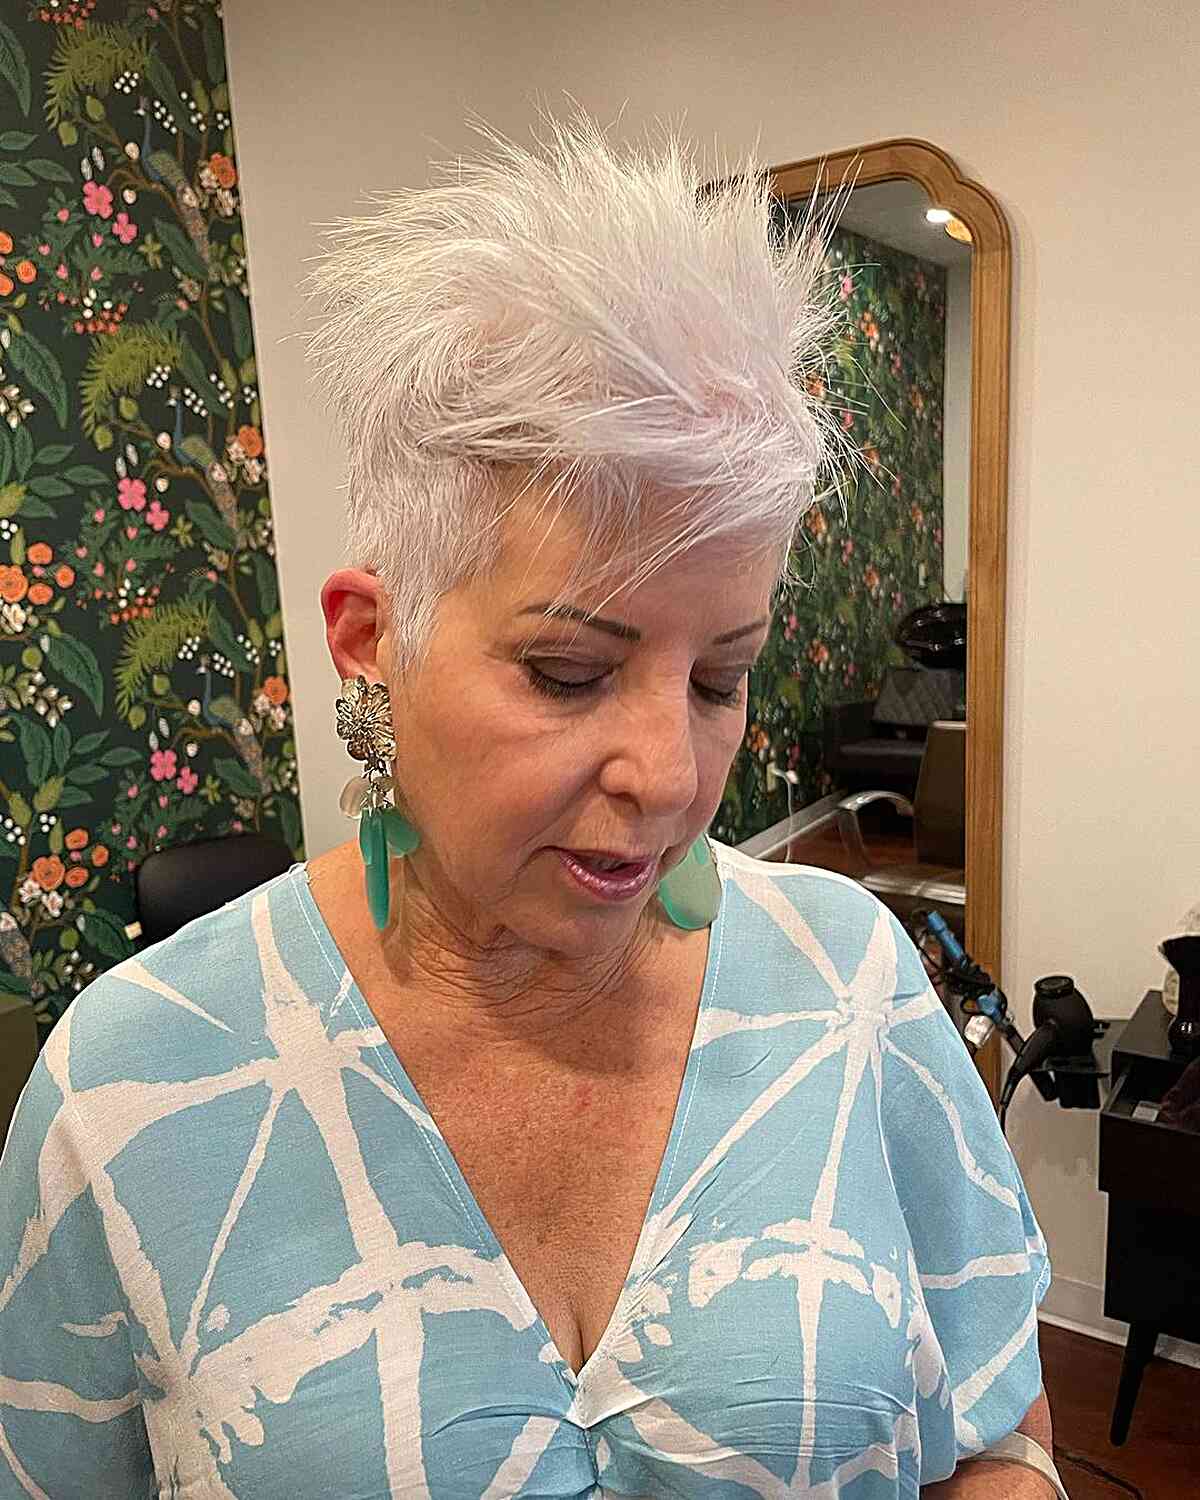 Classic White Spiky Pixie Cut for Thin Haired Women Aged 60